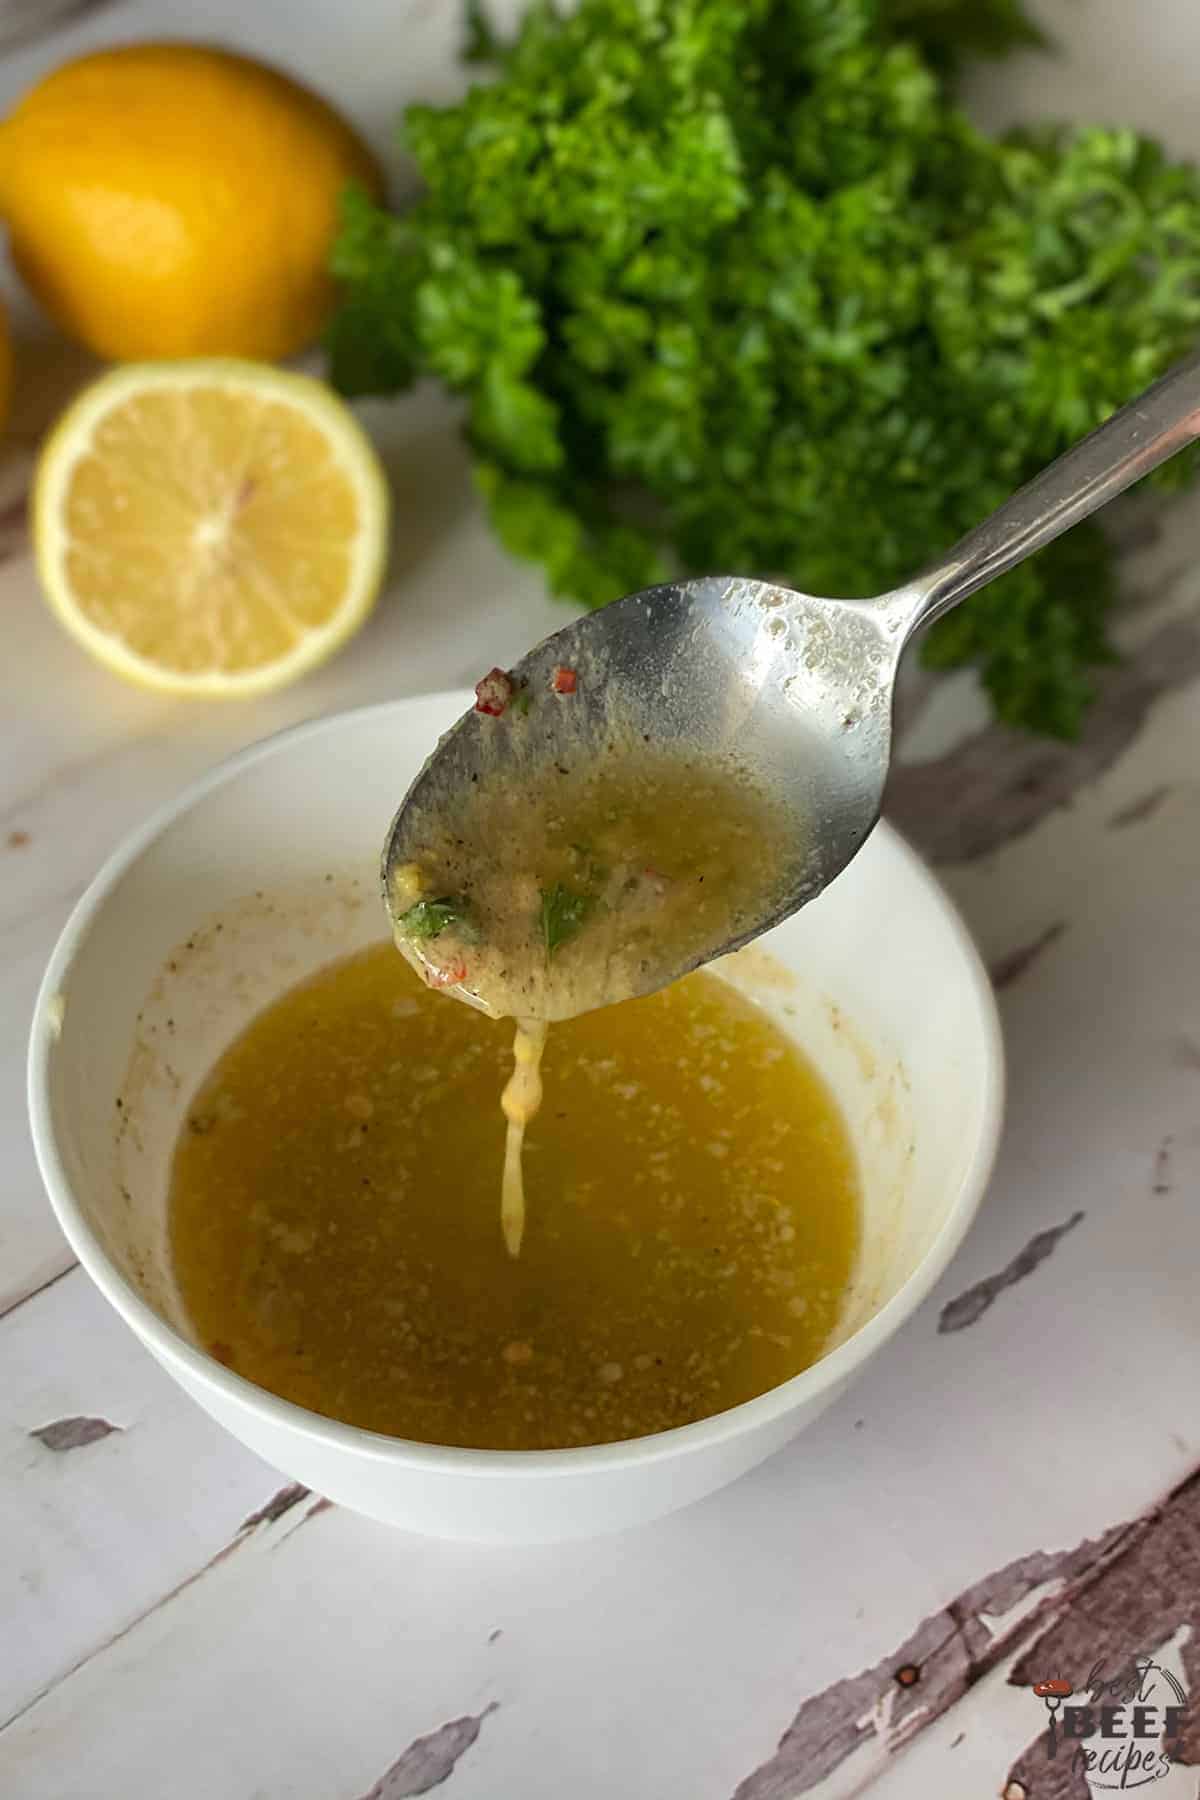 Dripping cowboy butter sauce from a spoon into a bowl